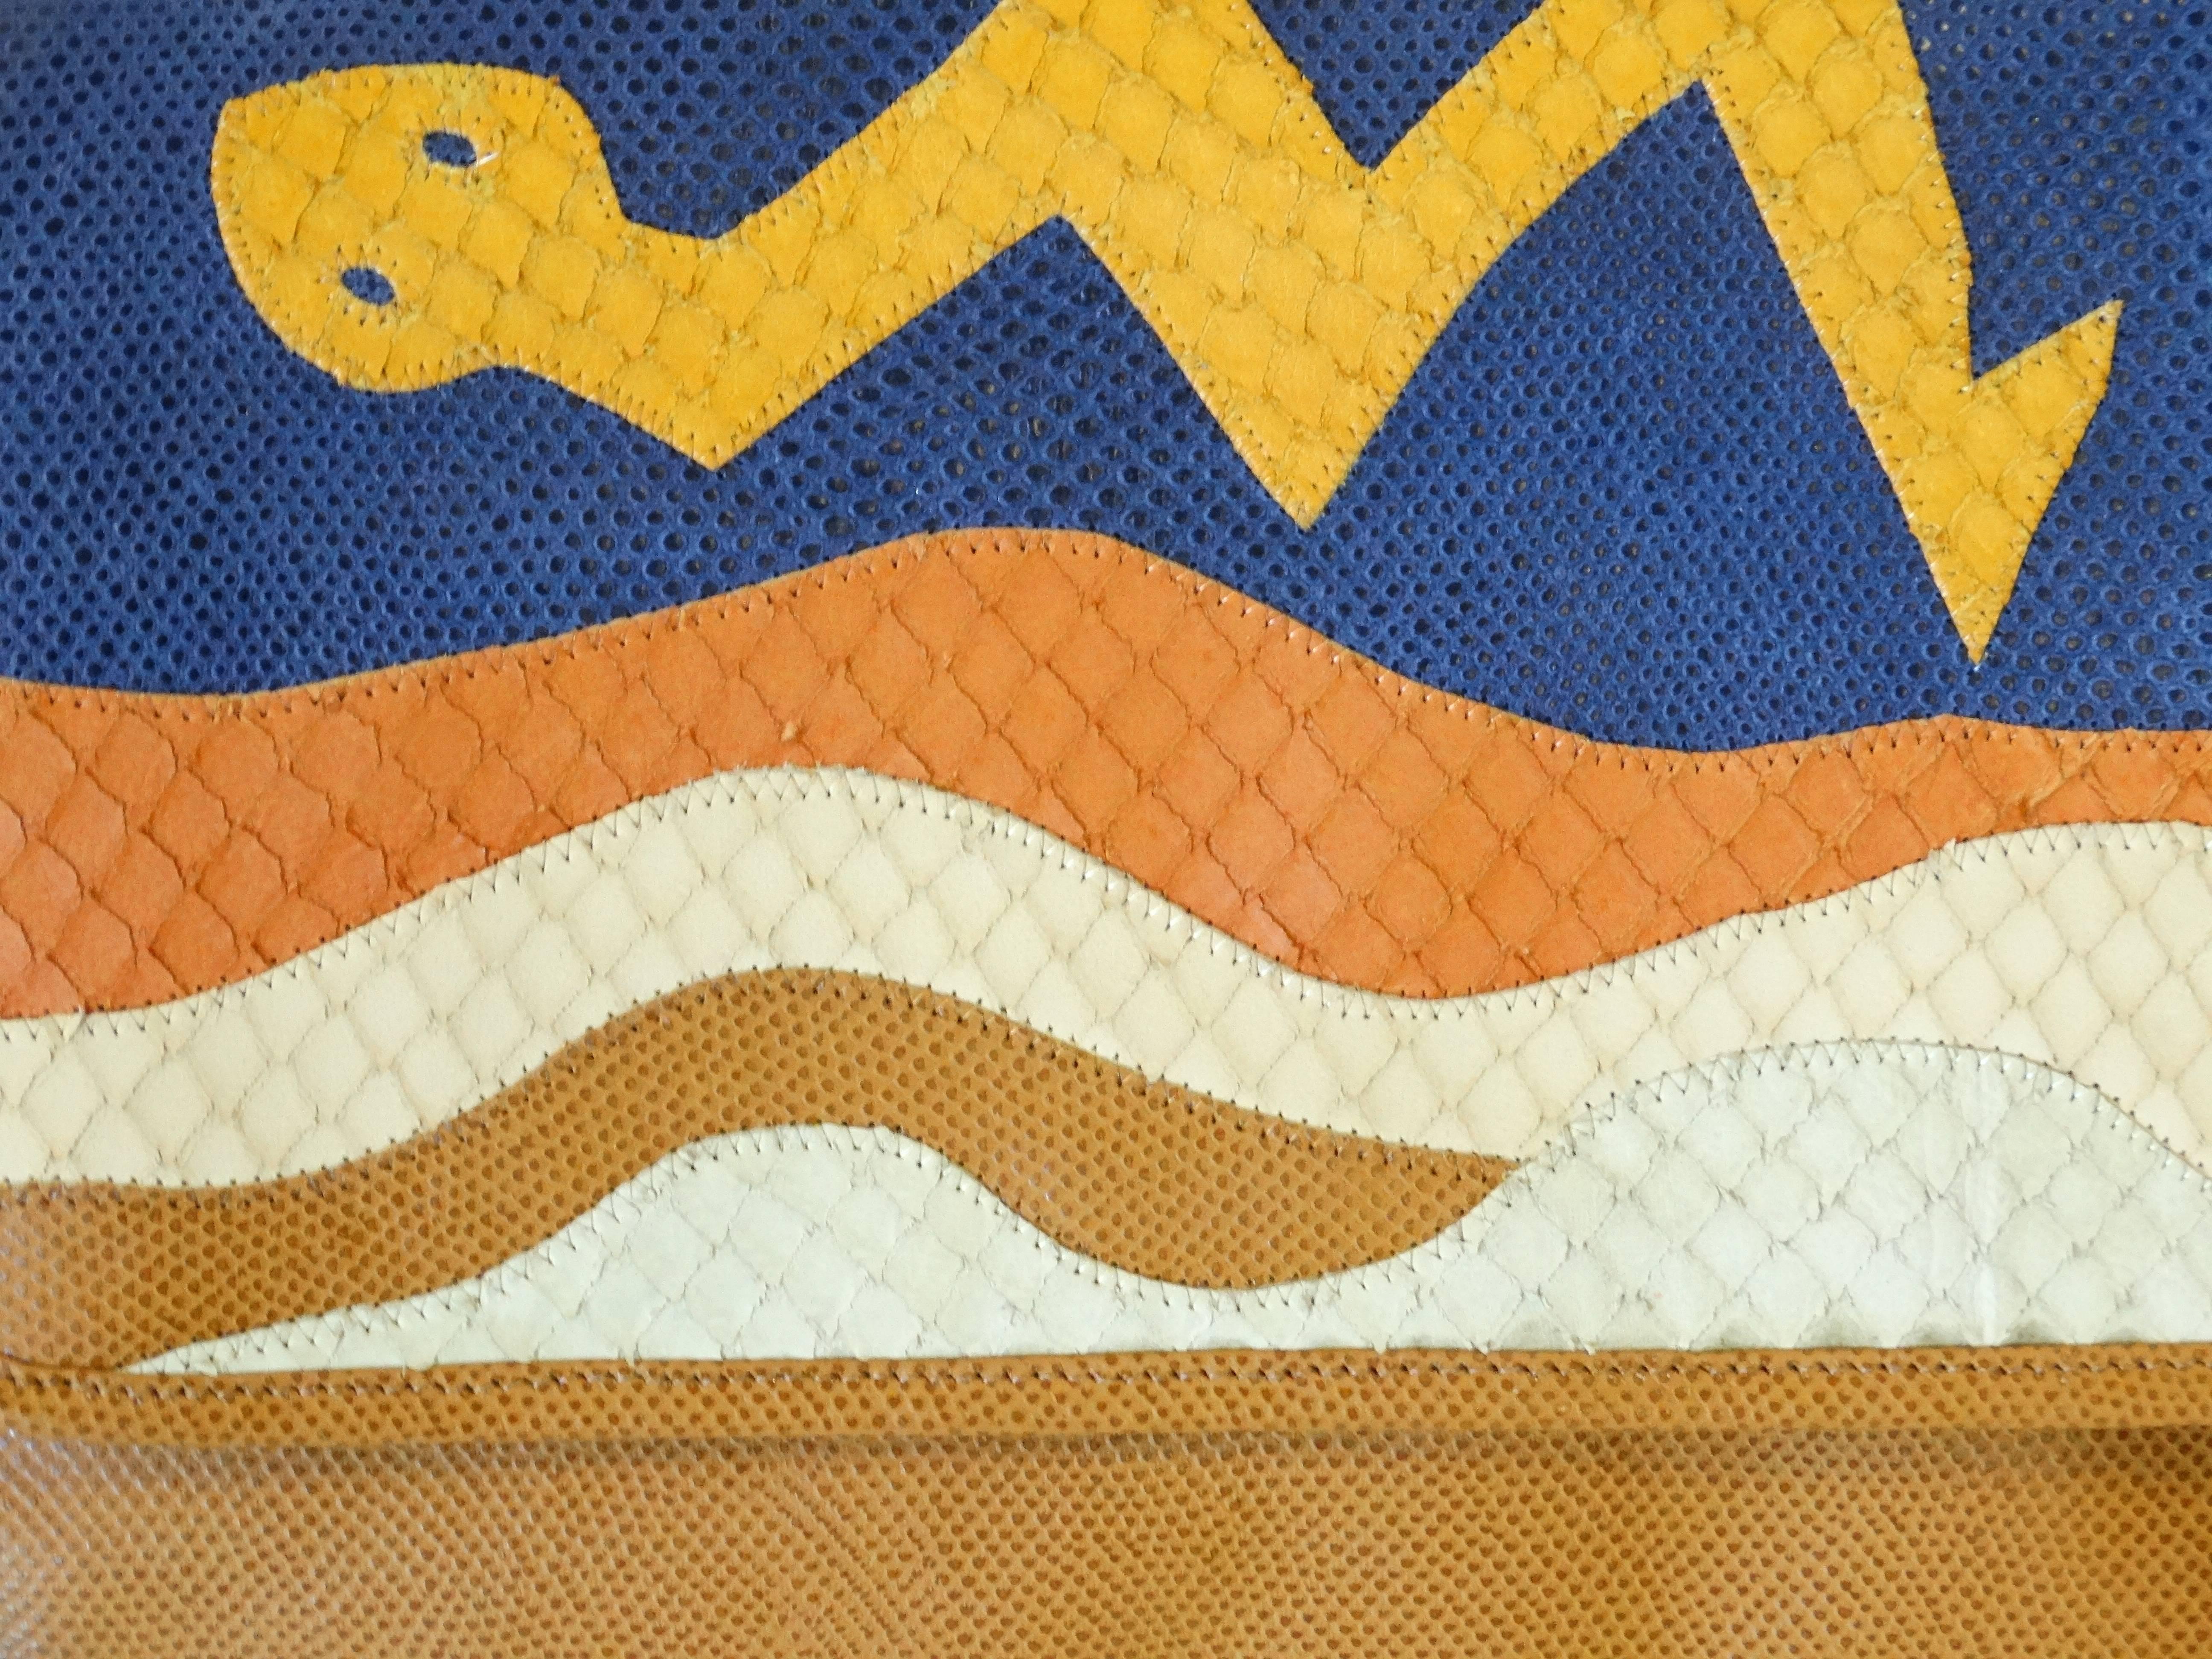 Wild Wild West... Gorgeous and unique vintage CARLOS FALCHI purse. This purse is made of leather and has a depiction of a snake on the front. The purse is in excellent condition with no damage. One interior zip pocket, signed lining